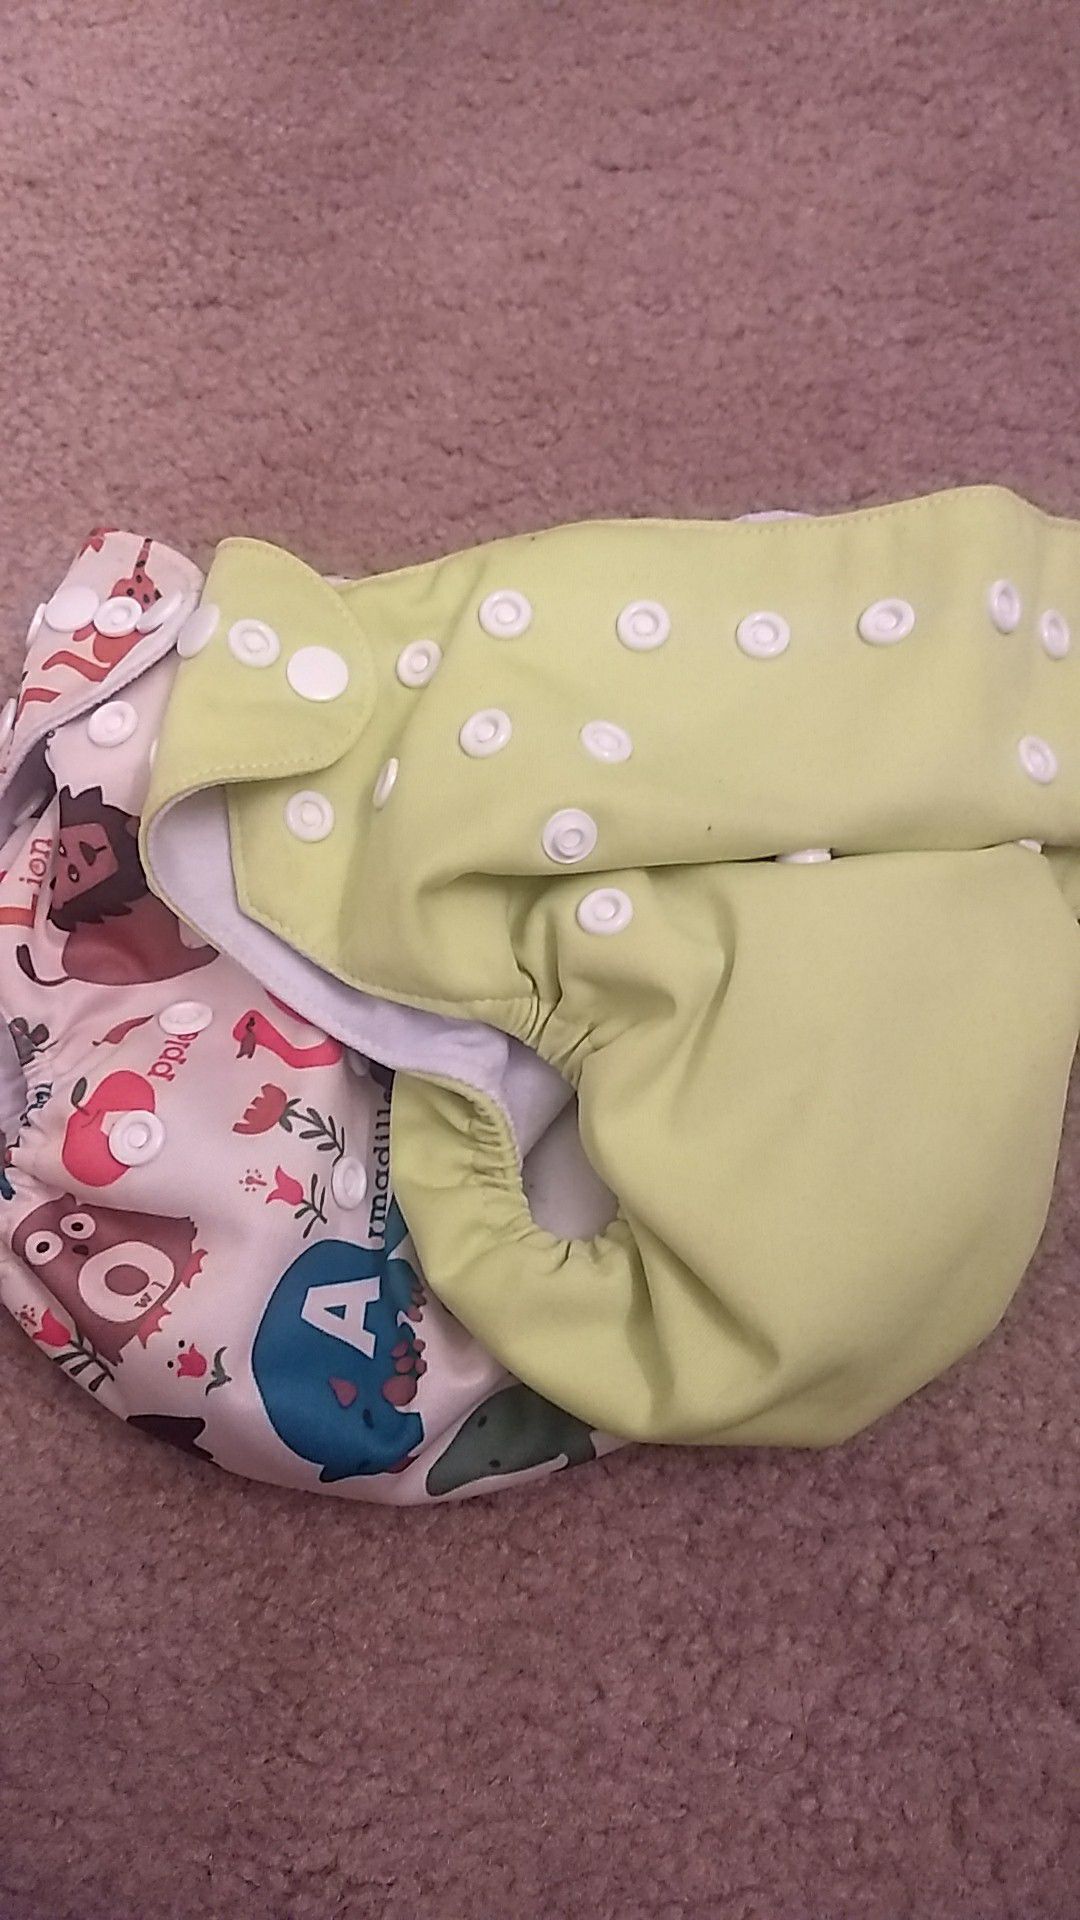 Cloth Diapers $10 for both!!